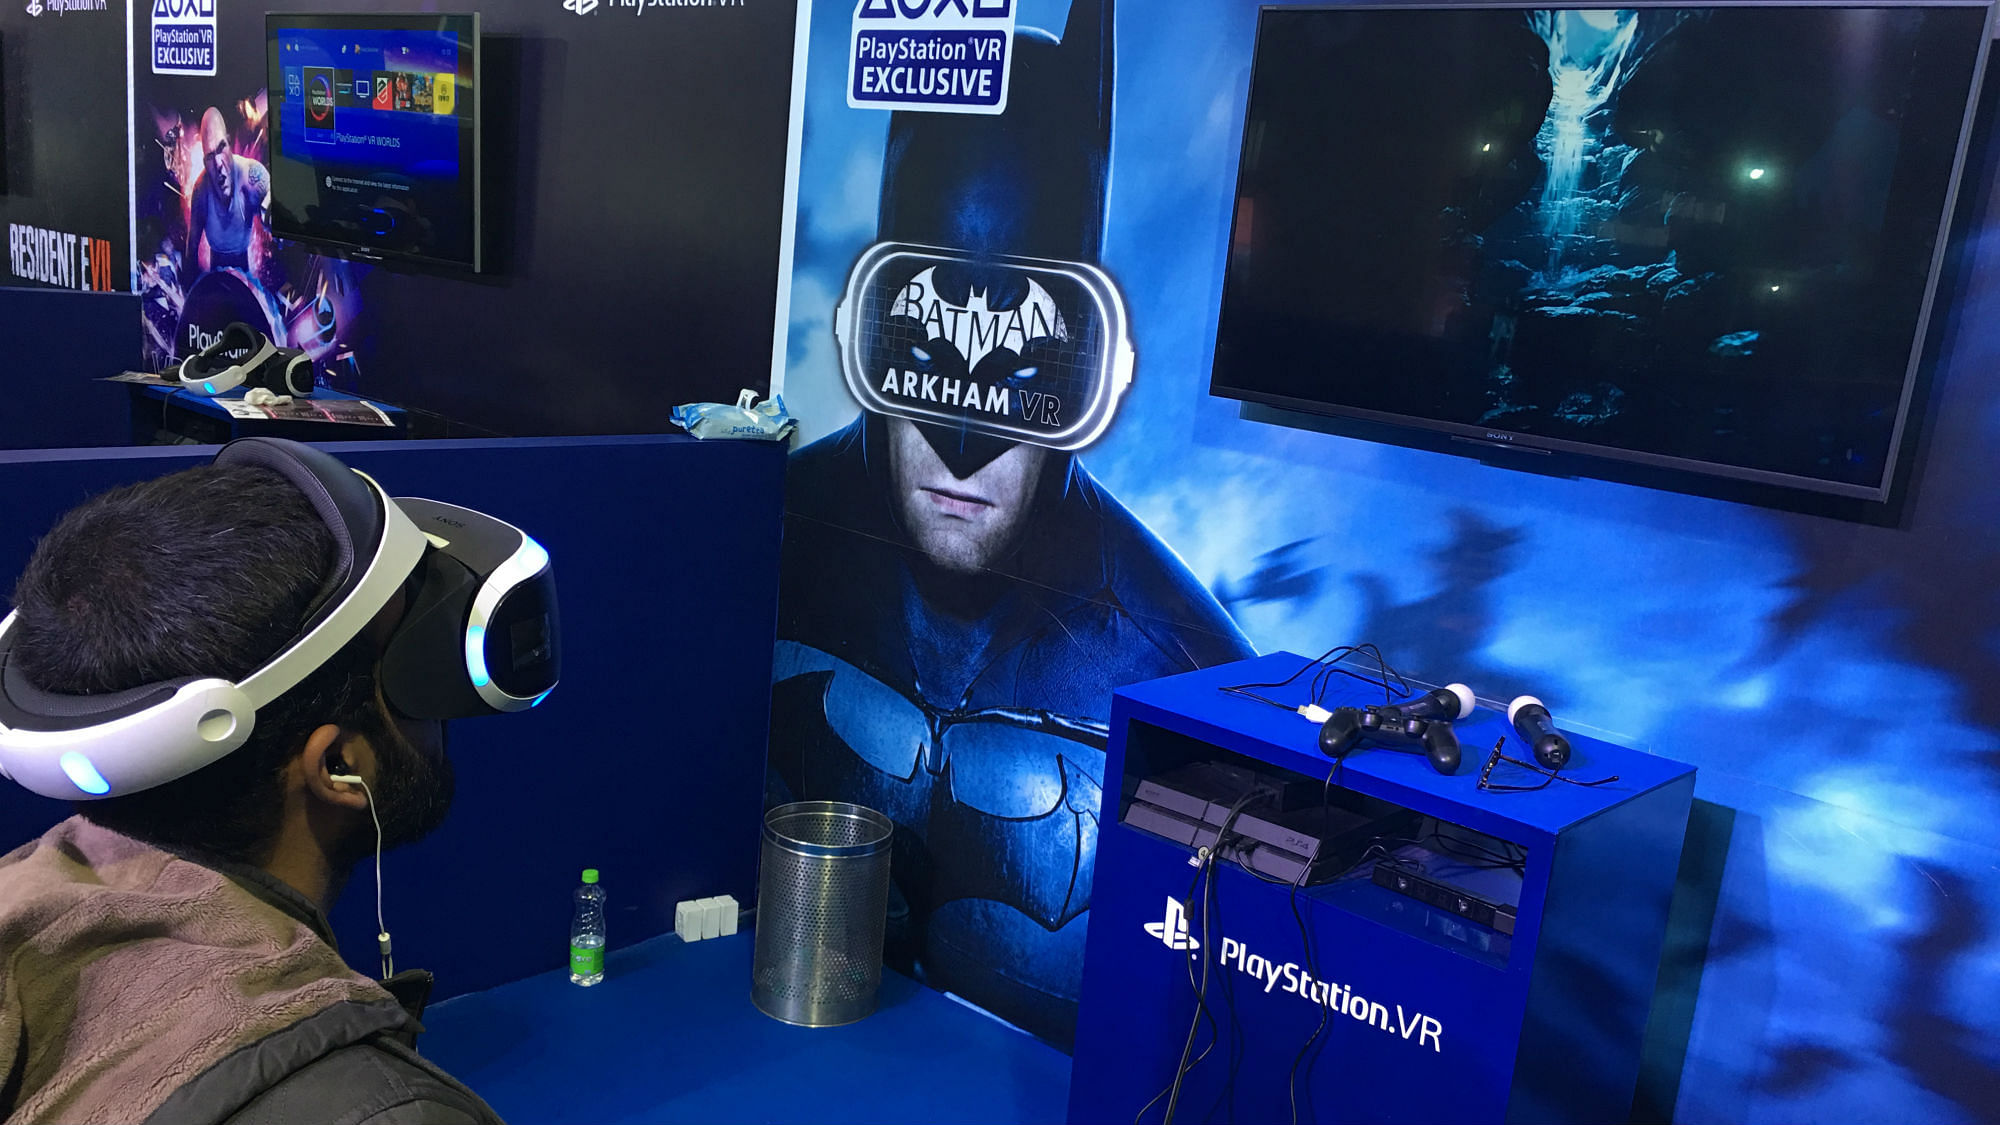 We tried out the PlayStation VR headset for a short time. (Photo: <b>The Quint</b>)